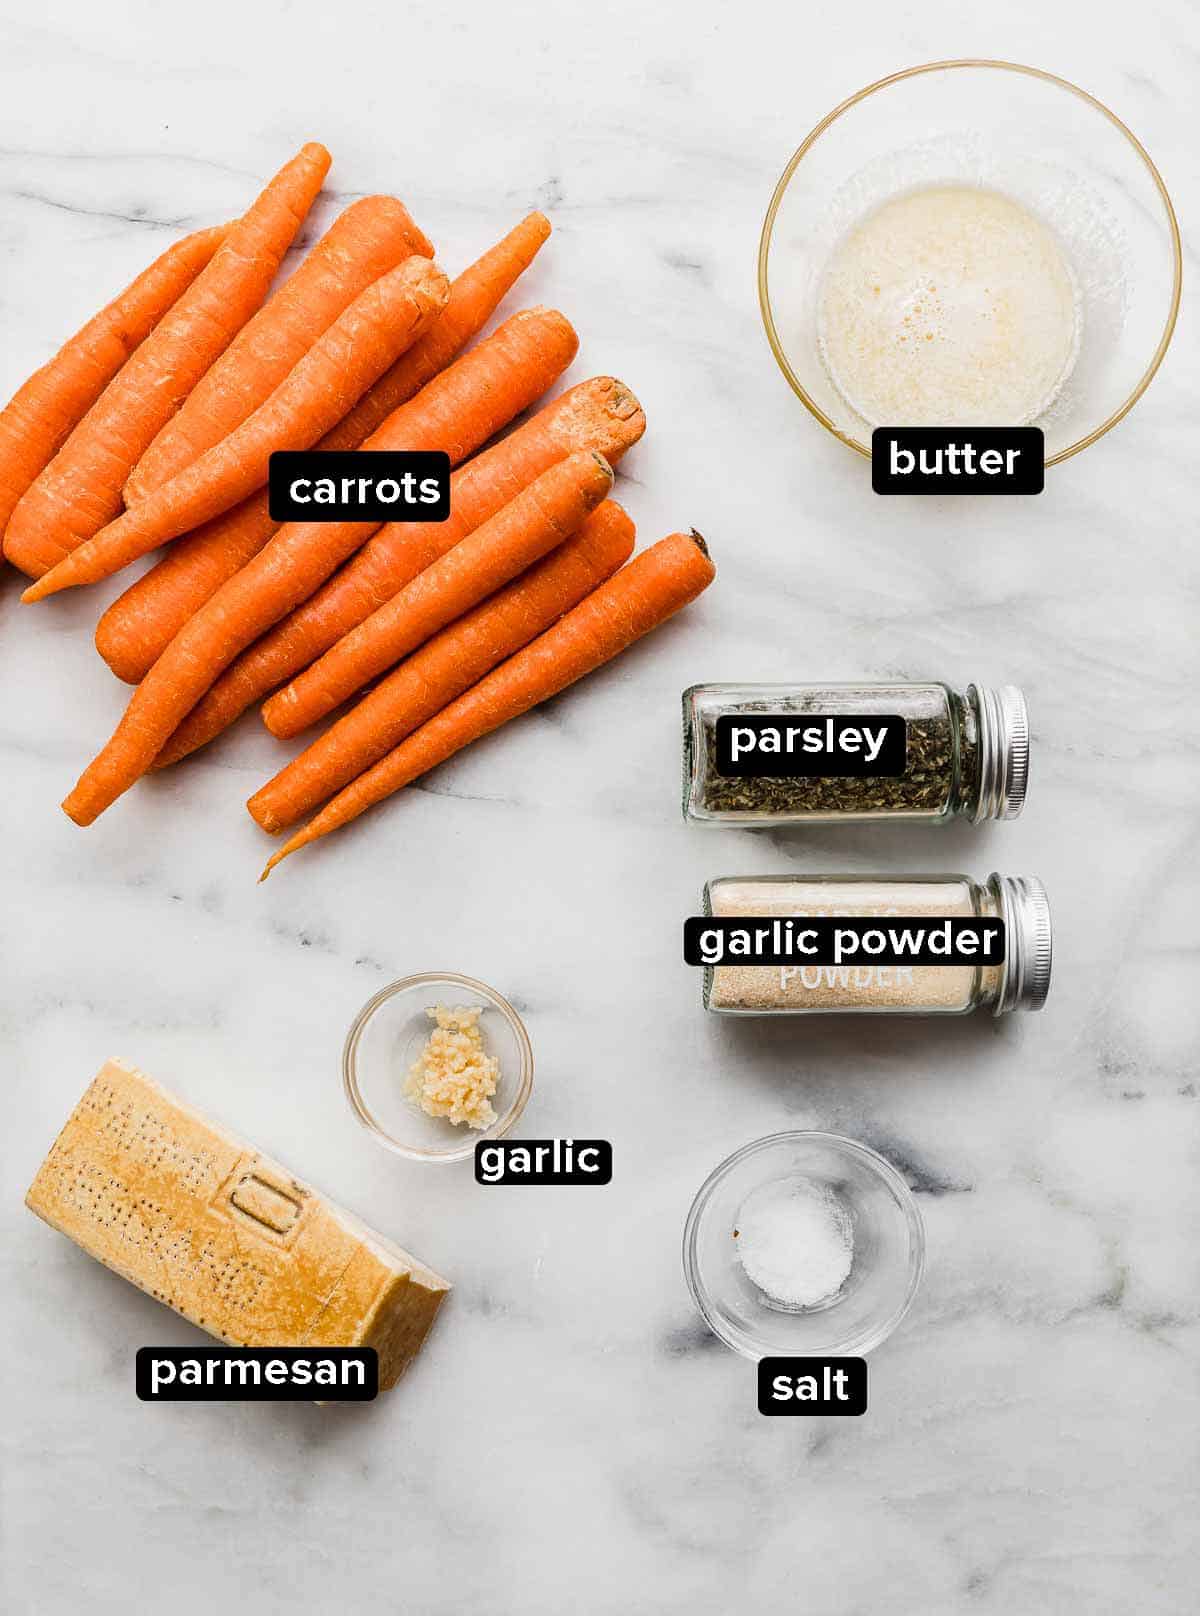 Ingredients used to make Garlic Butter Roasted Carrots on a white background: carrots, butter, garlic, salt, parsley, and parmesan.